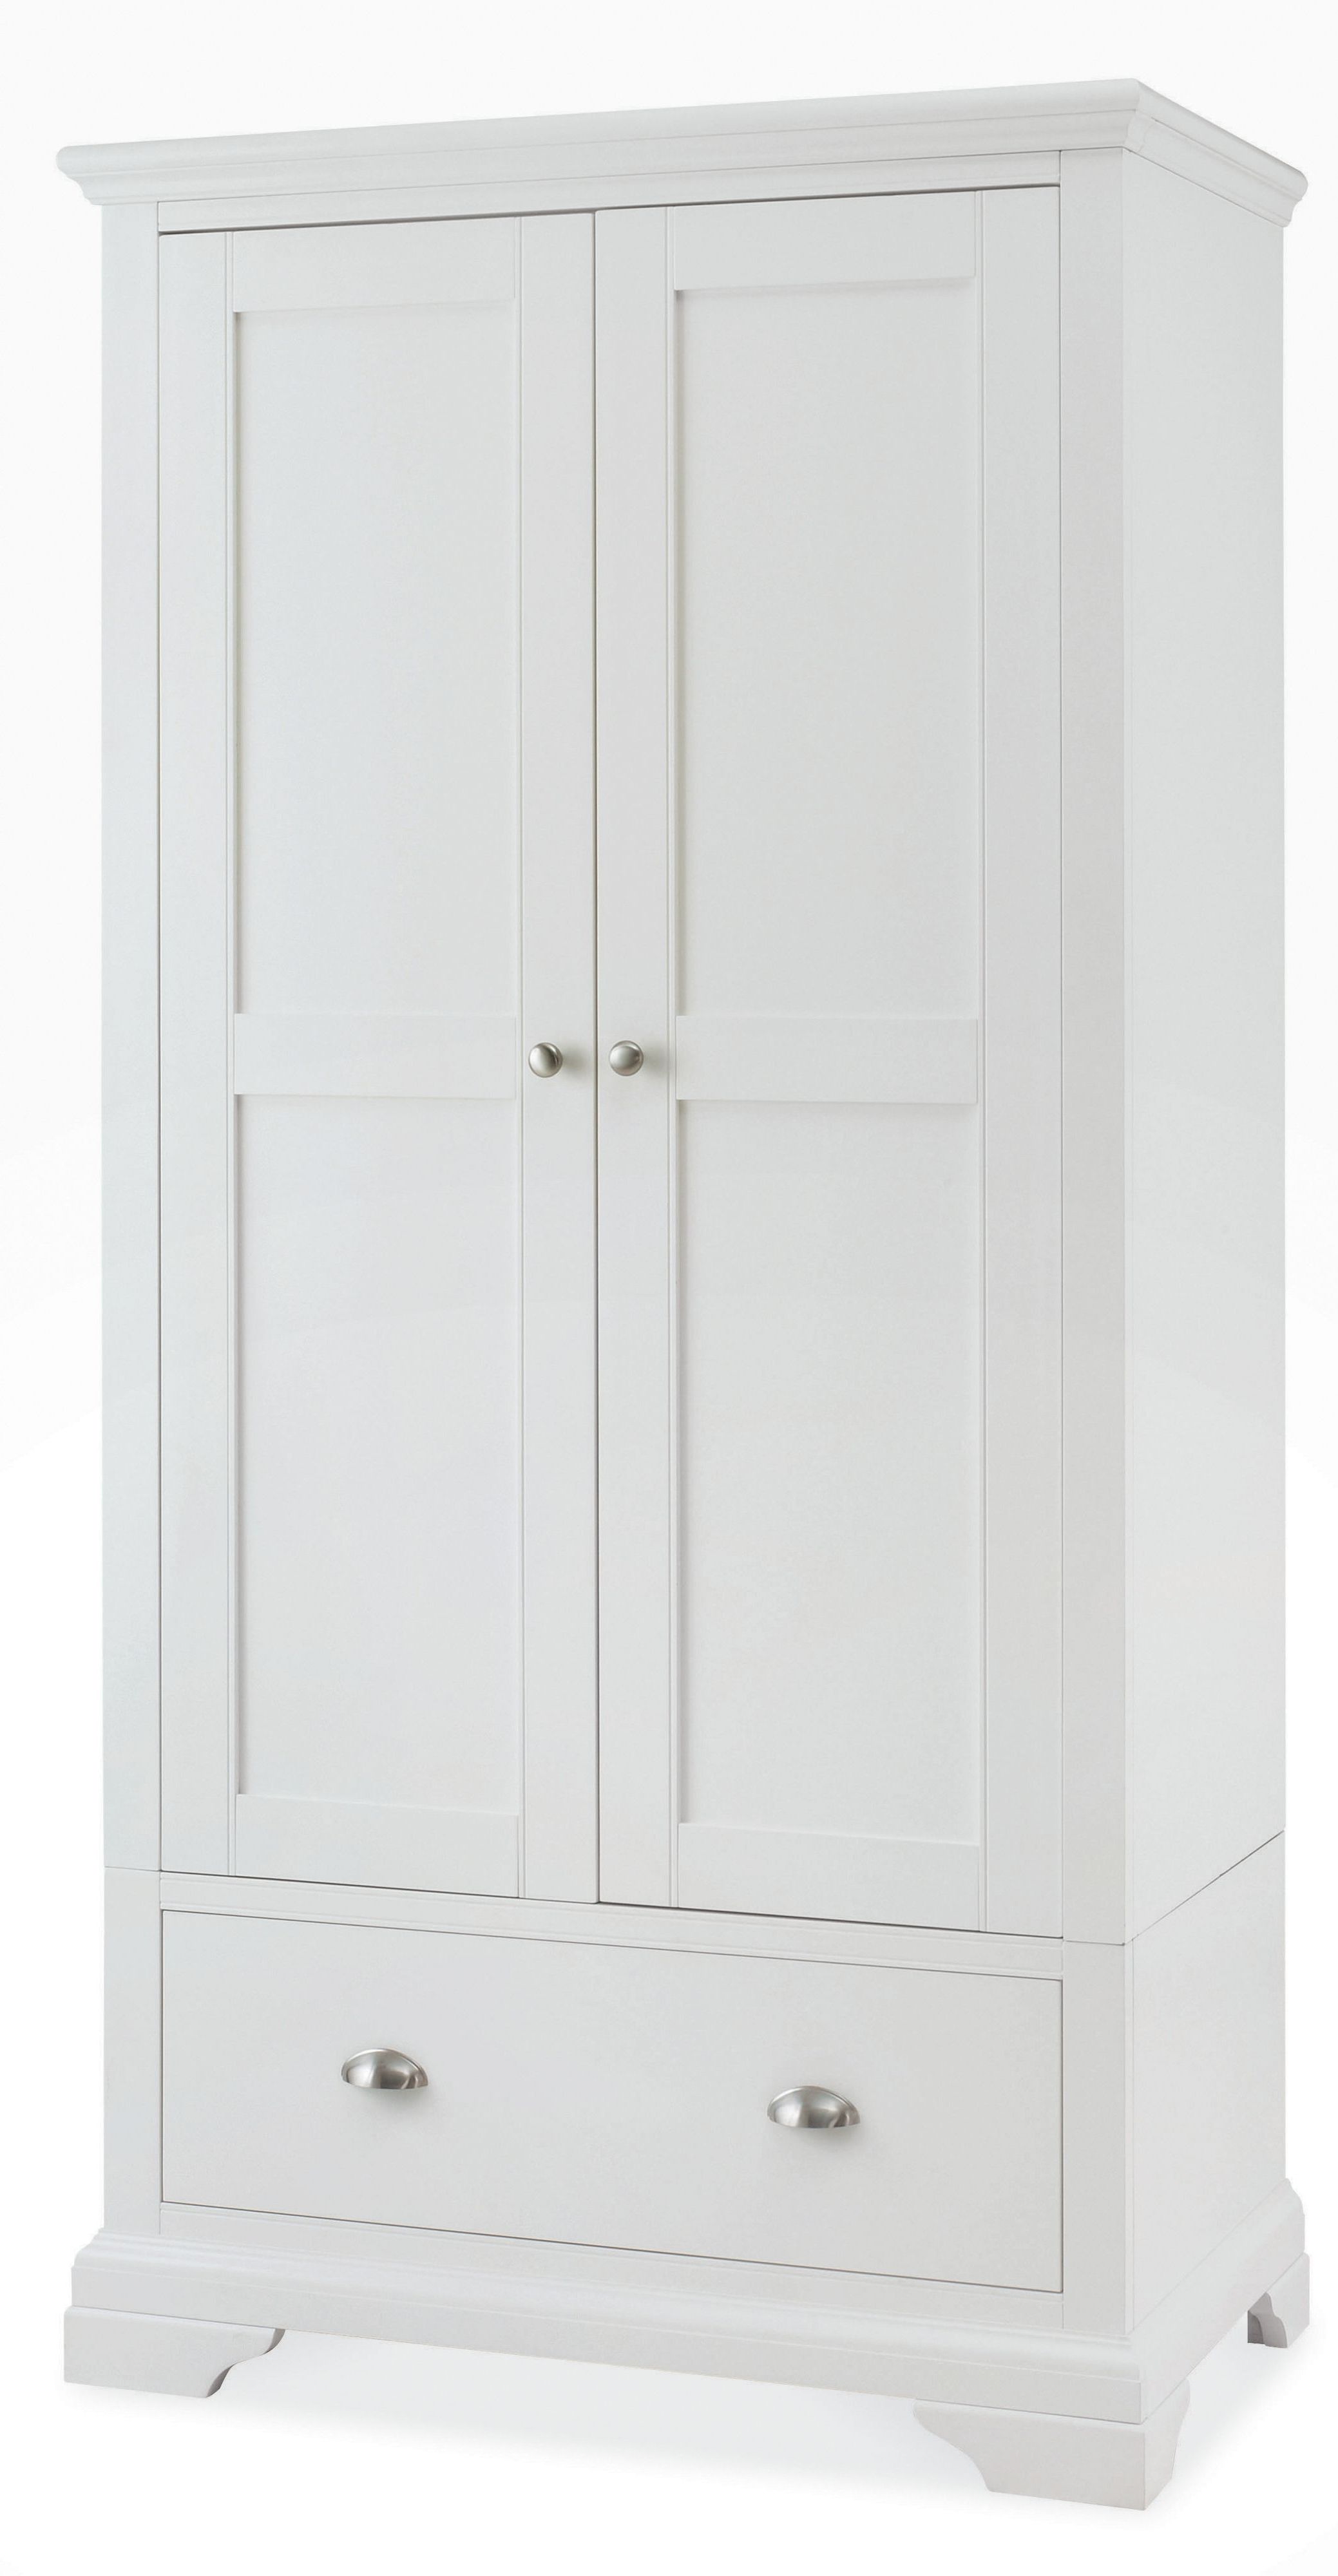 White Wooden Wardrobes In Famous Large White Wardrobe With Drawers Wooden And Shelves Single This (View 2 of 15)